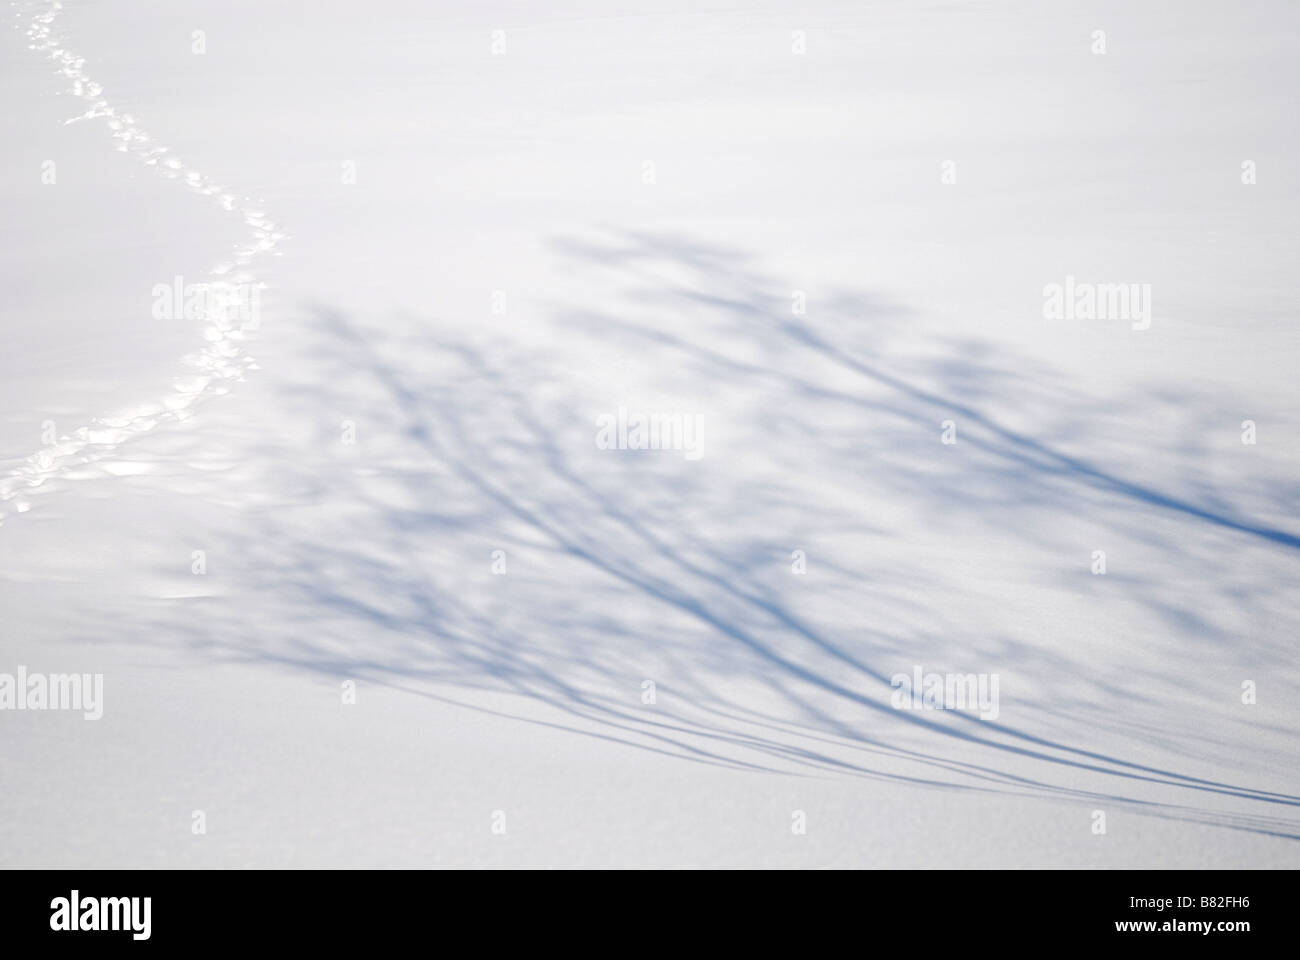 Shadows of birch trees and footprints in the snow, Norway Stock Photo